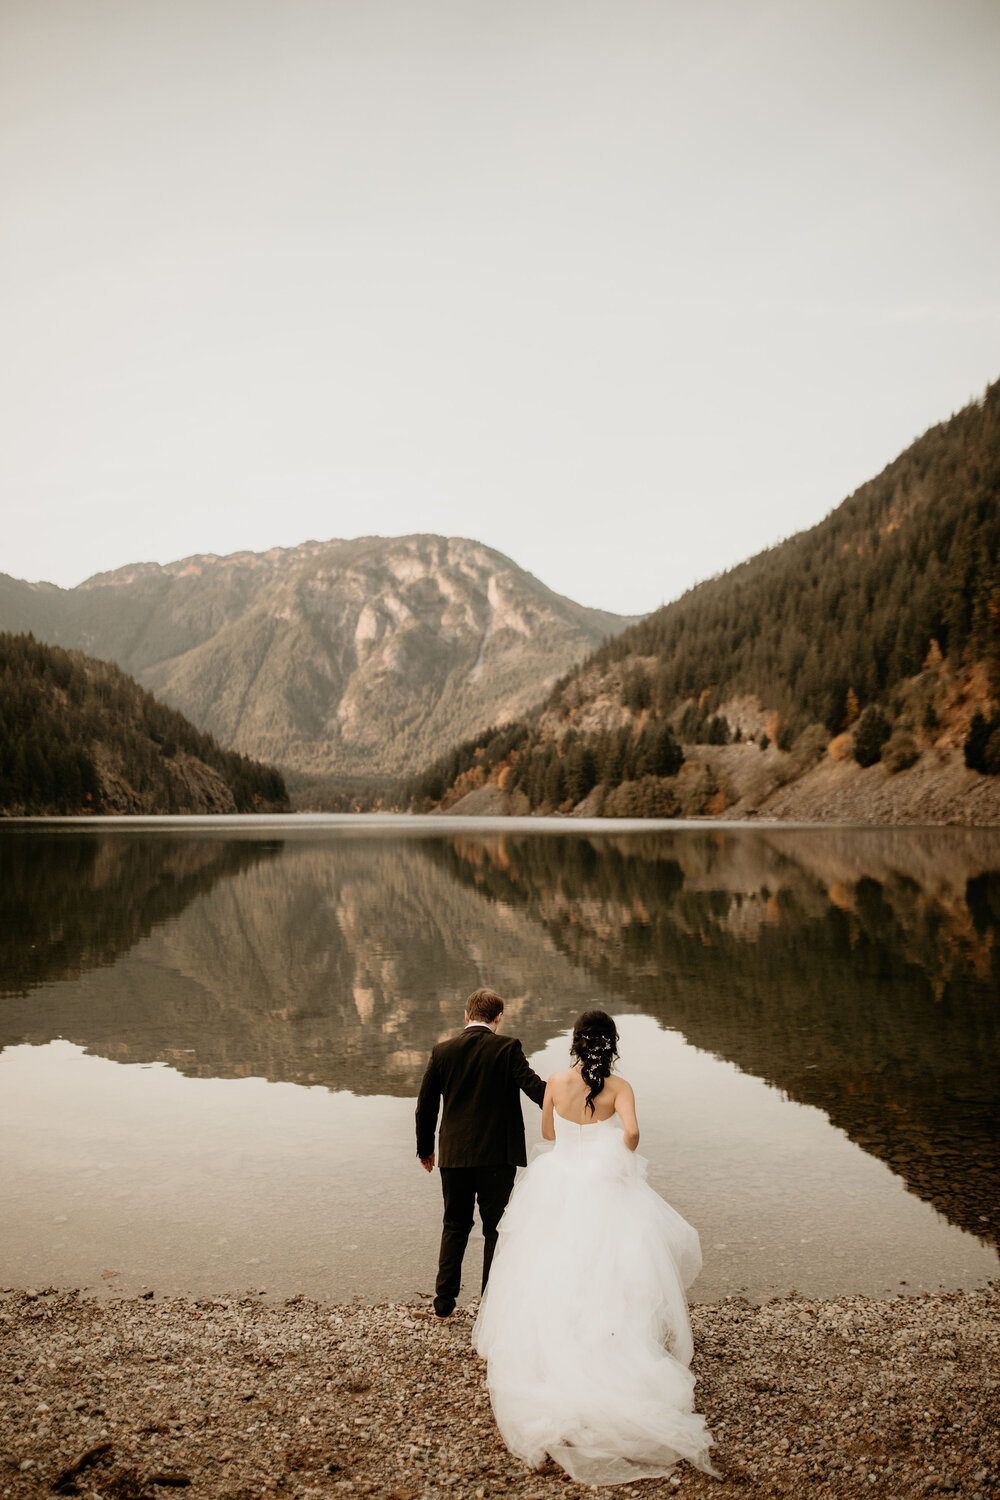 how to get married in washington state